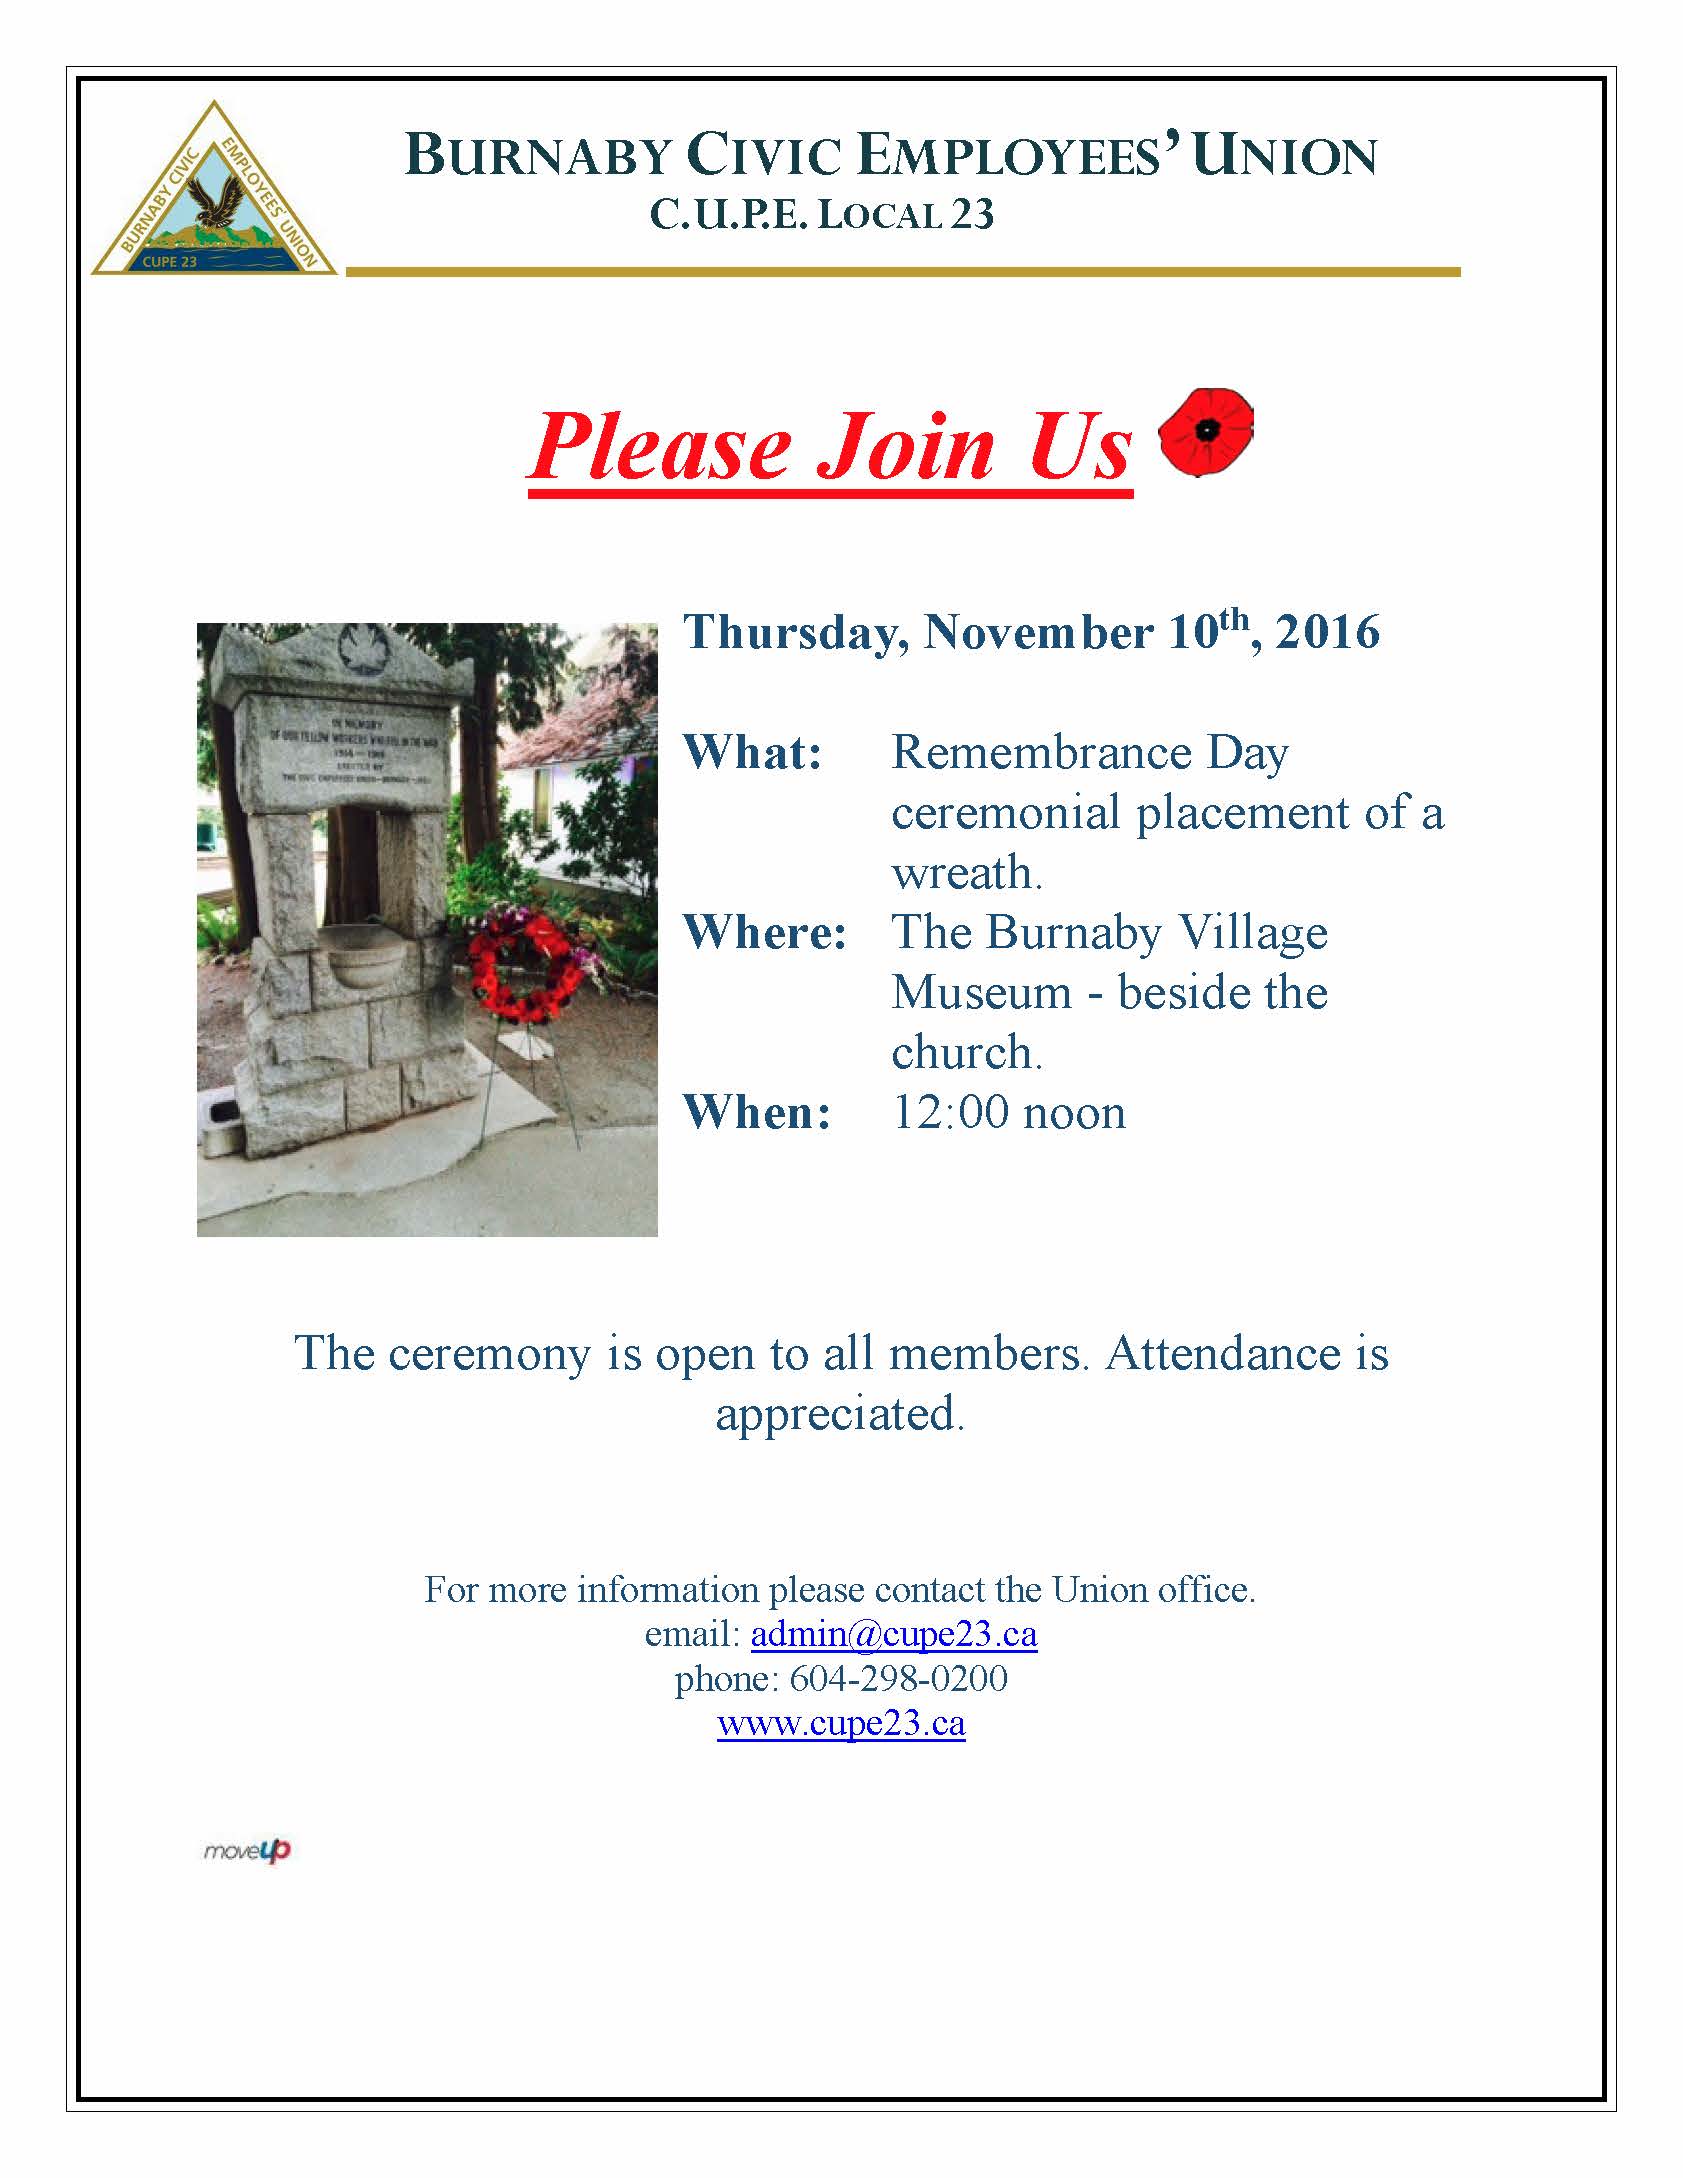 remembrance-day-notice-2016